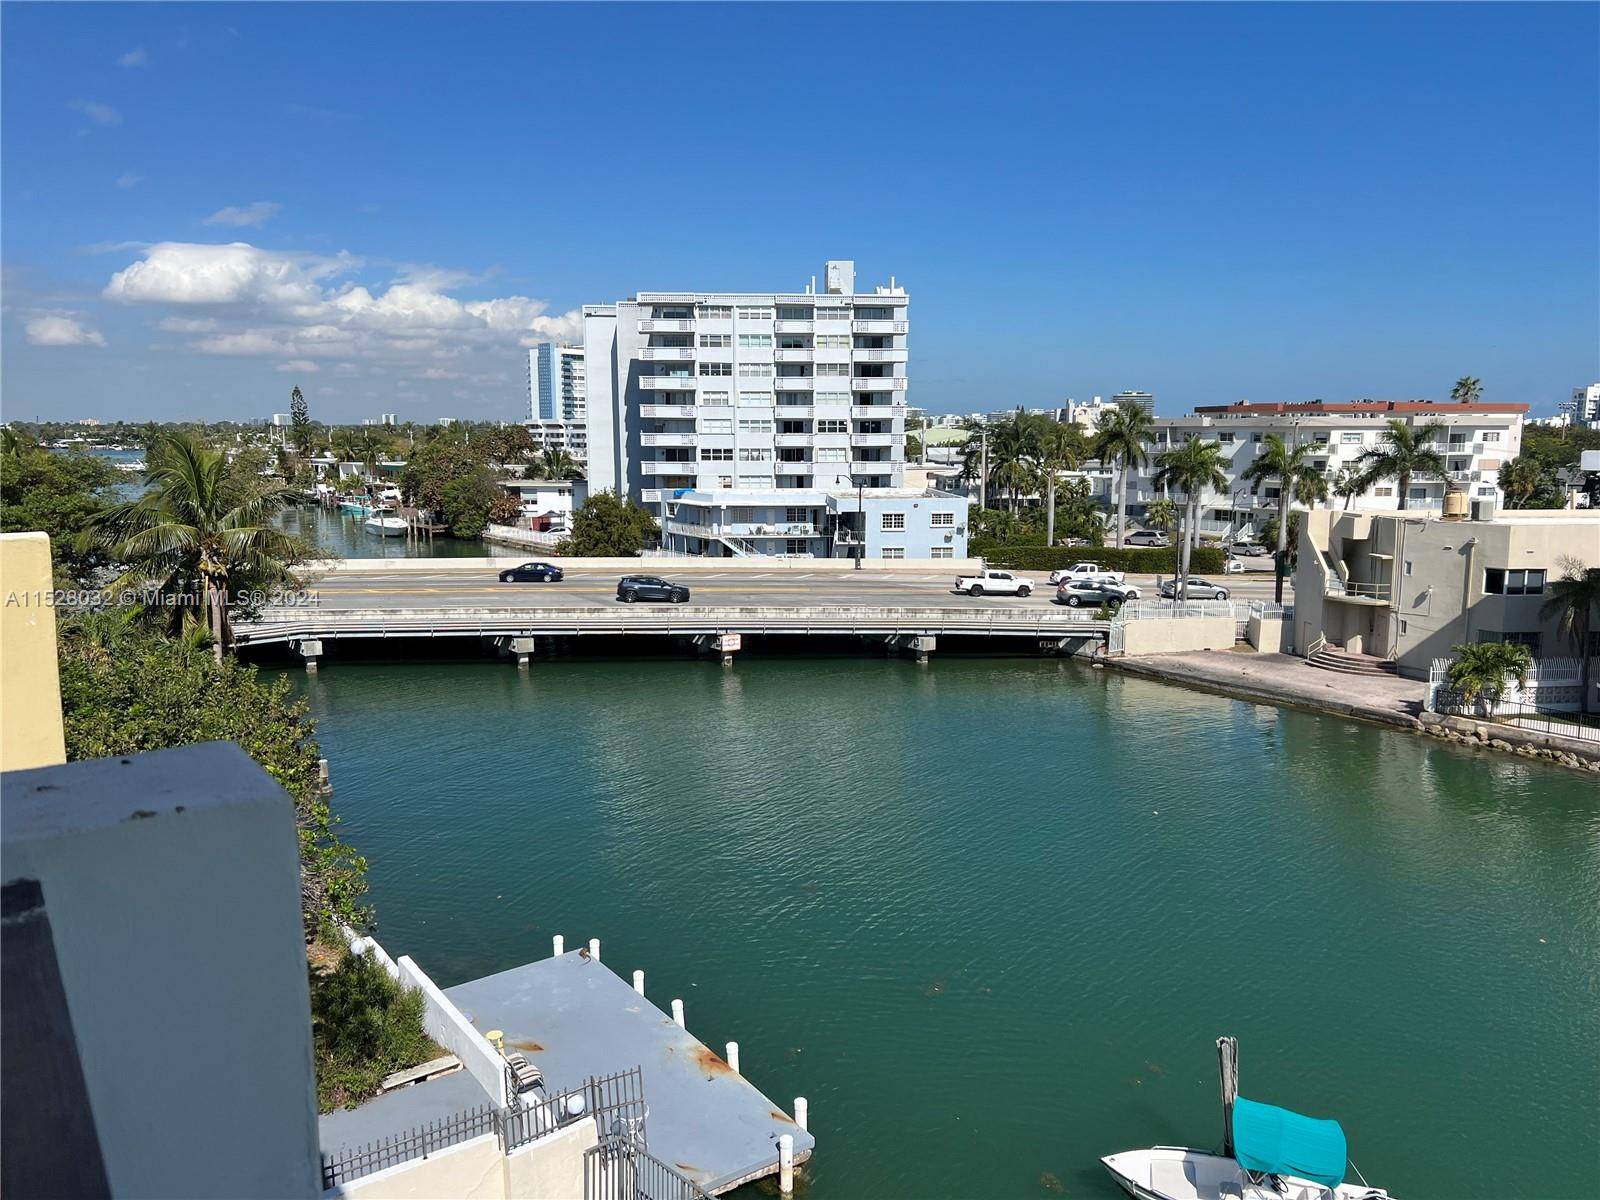 ENJOY THE LOCATION AND THE WATER VIEWS OF THIS ENTIRELY REMODELED CONDO UNIT THAT FEATURES 2 BEDROOMS AND 2 FULL BATHROOMS BOTH IN SUITE.